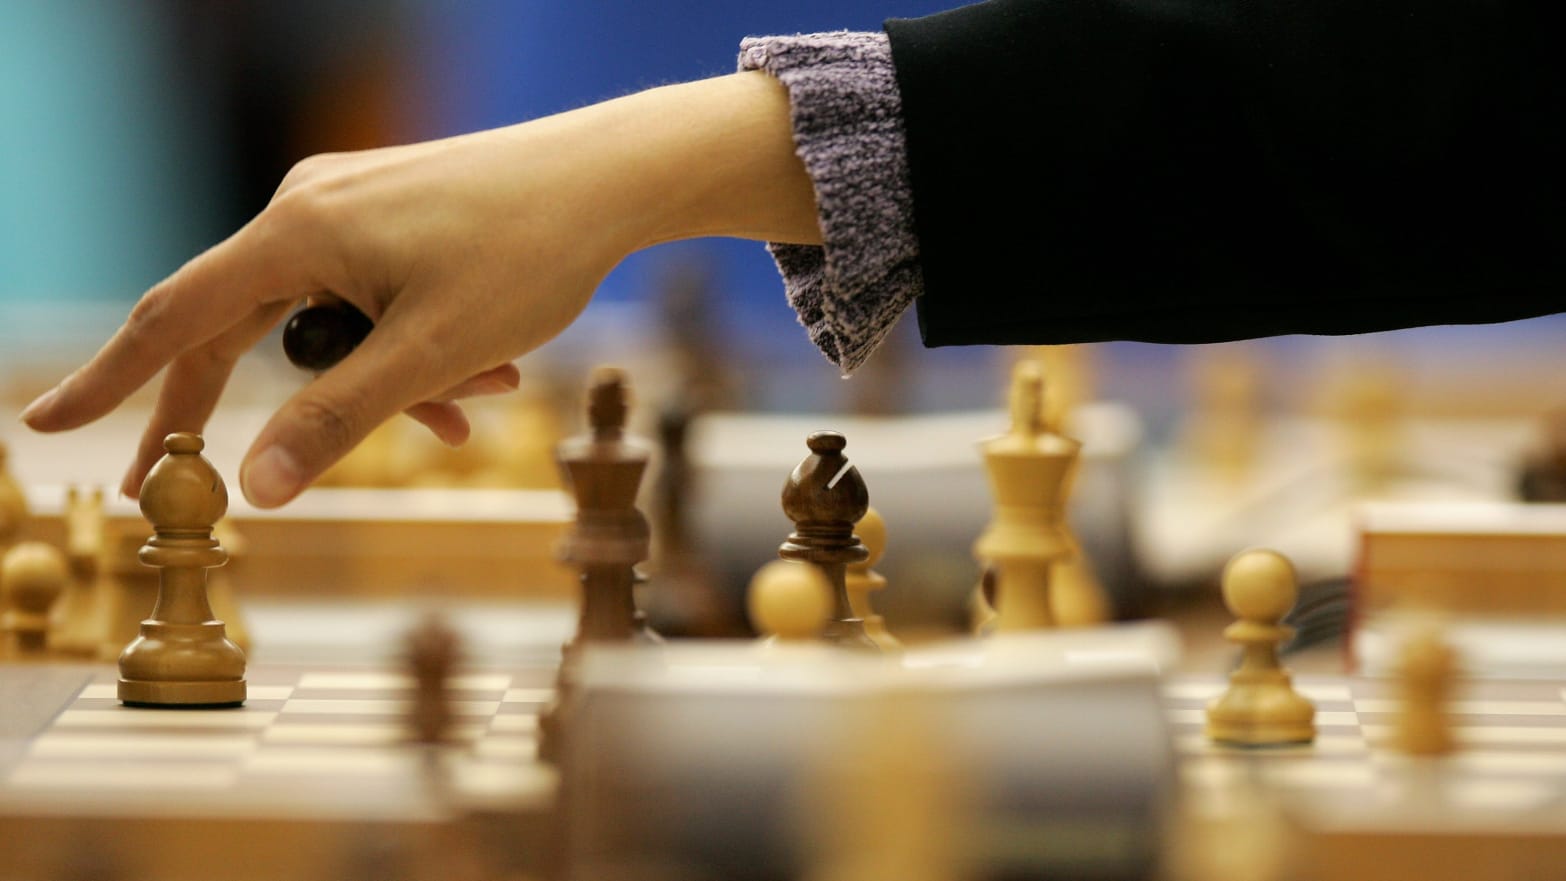 Decision to block trans women from chess events draws fire